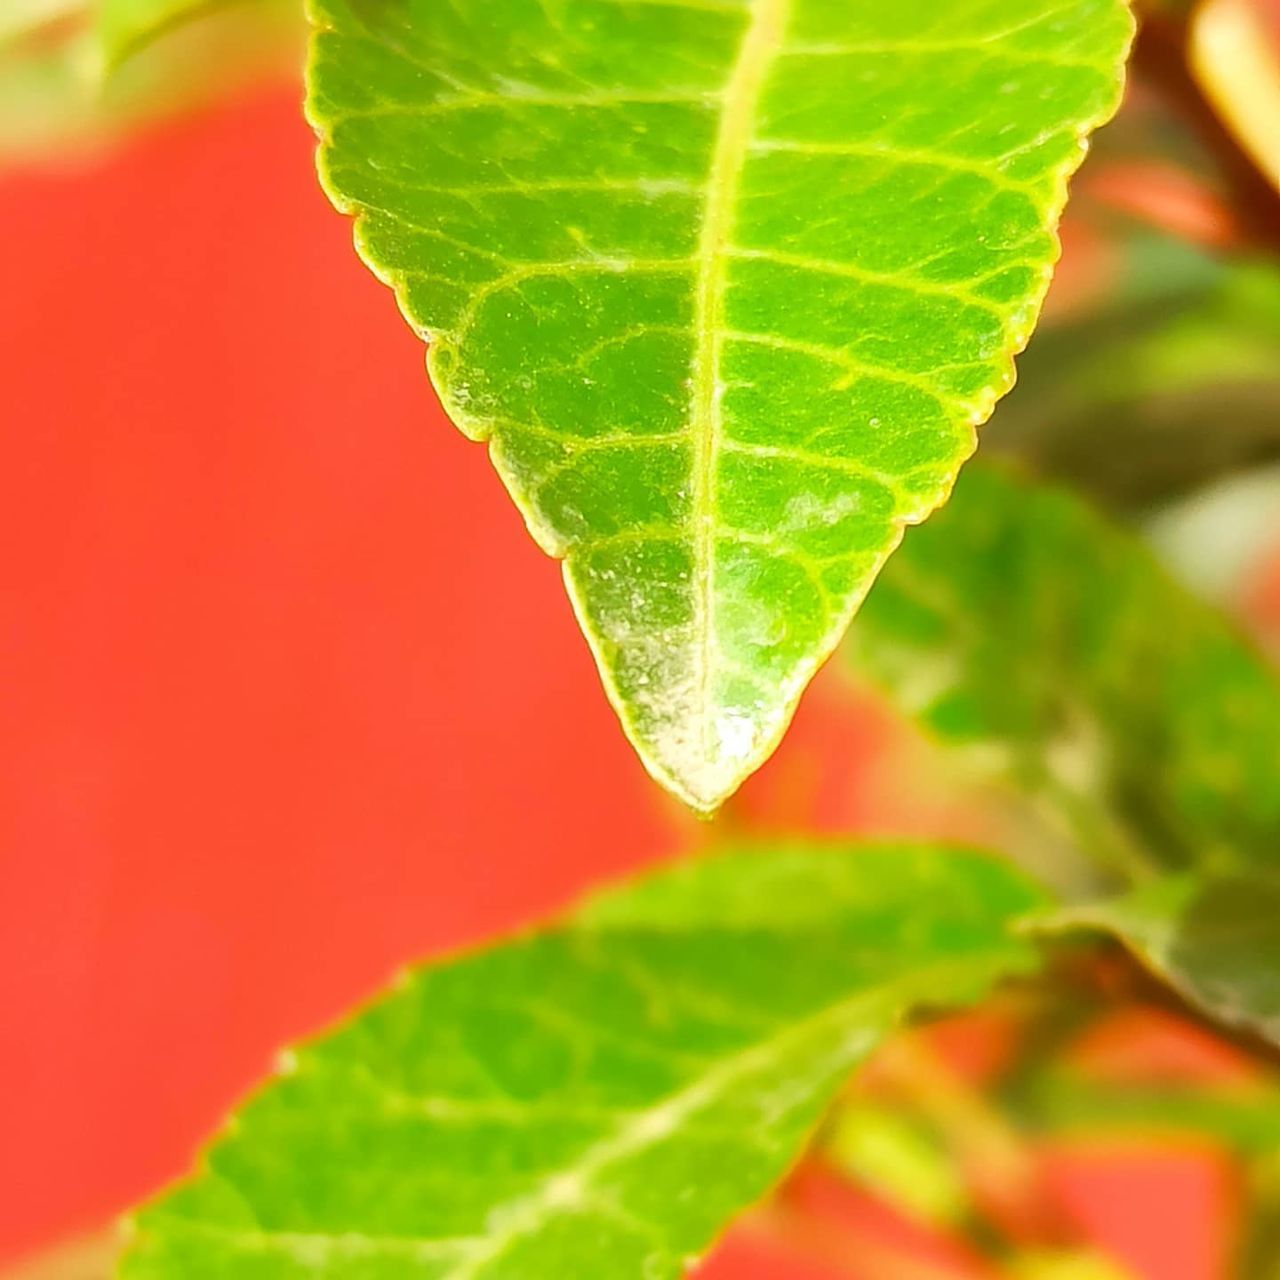 leaf, plant part, plant, nature, green, close-up, tree, no people, beauty in nature, leaf vein, flower, macro photography, growth, freshness, outdoors, red, drop, water, day, produce, selective focus, fruit, environment, food and drink, branch, vibrant color, macro